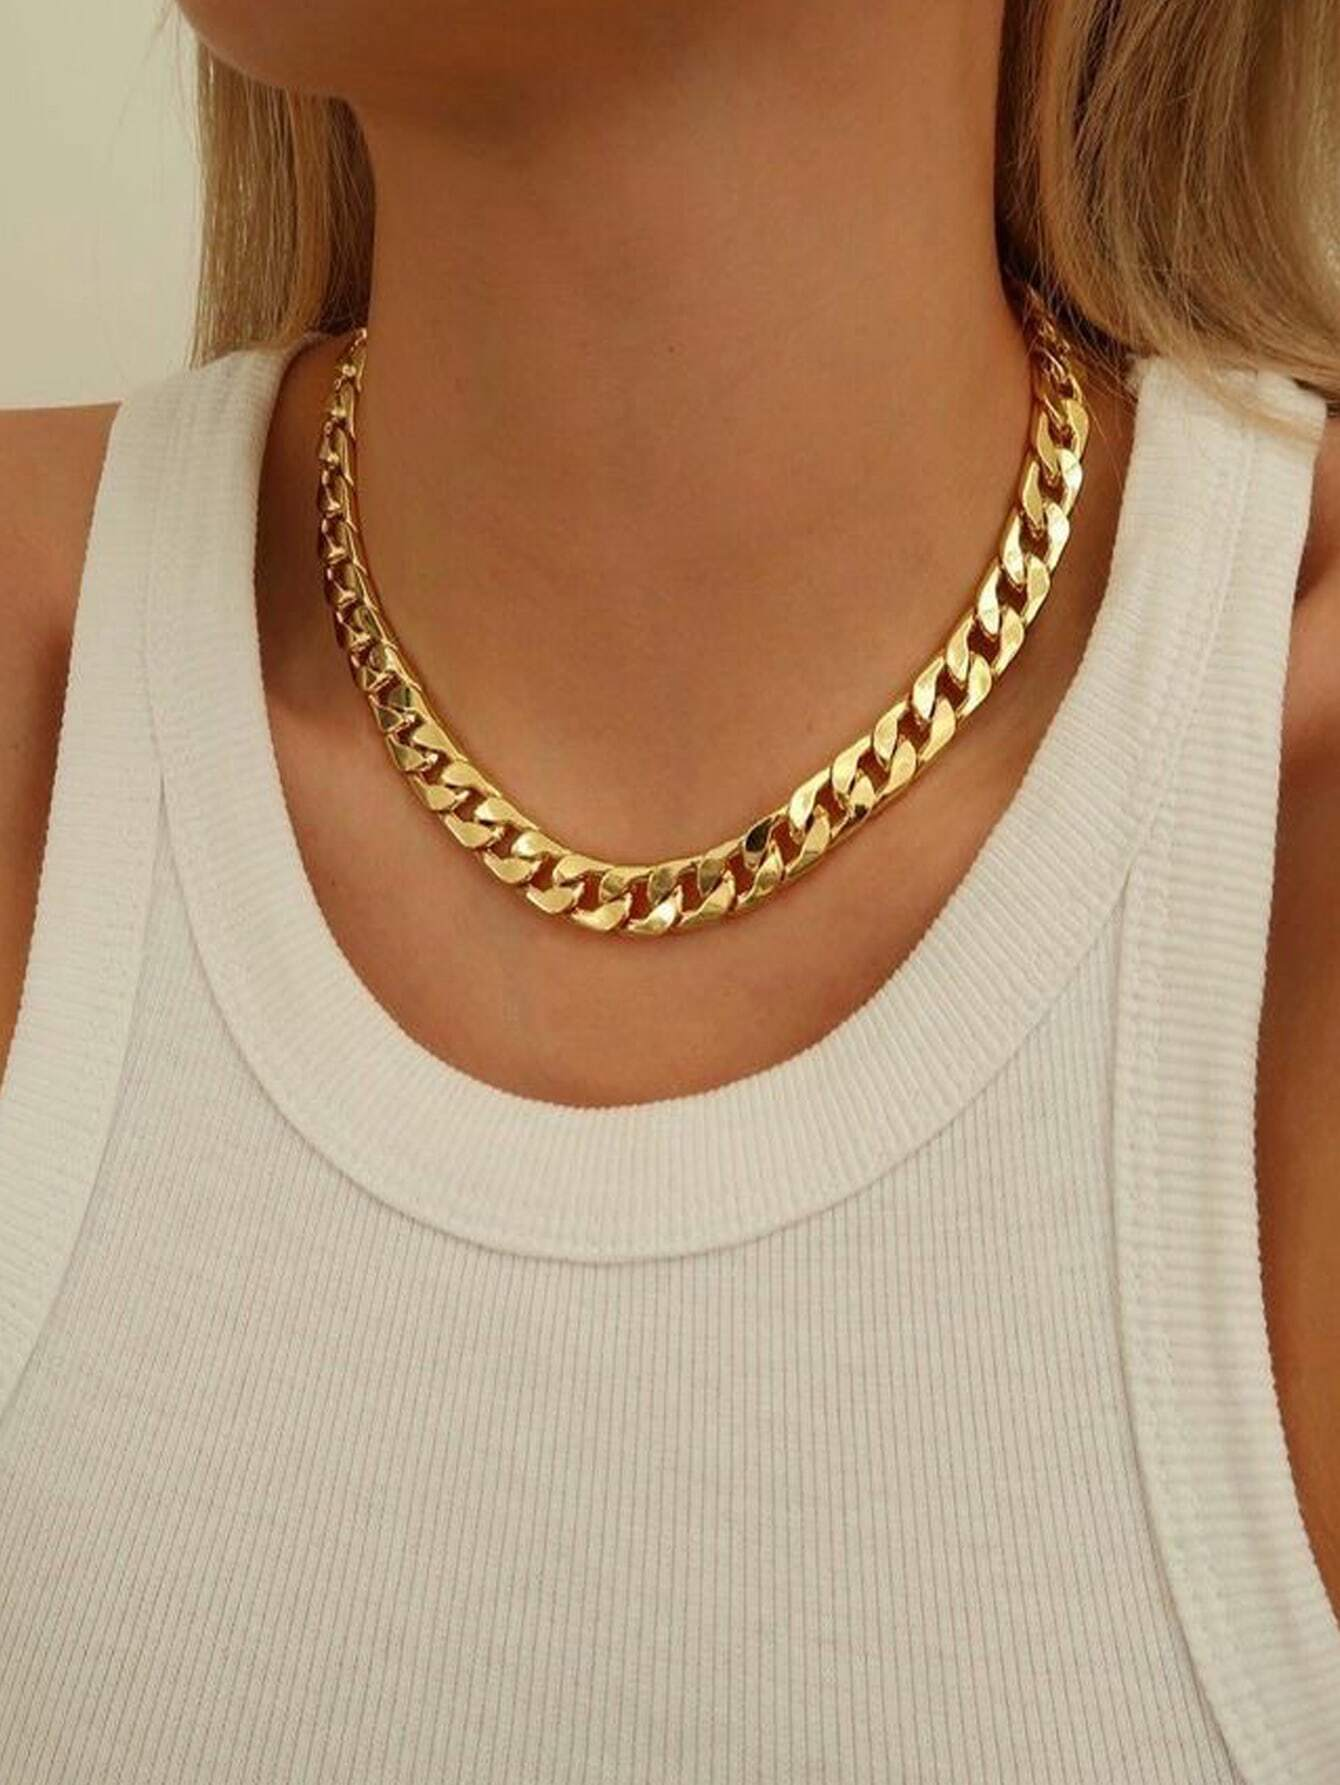 1pc Simple Chunky Chain Clavicle Chain Necklace Women Girls Jewelry Accessories